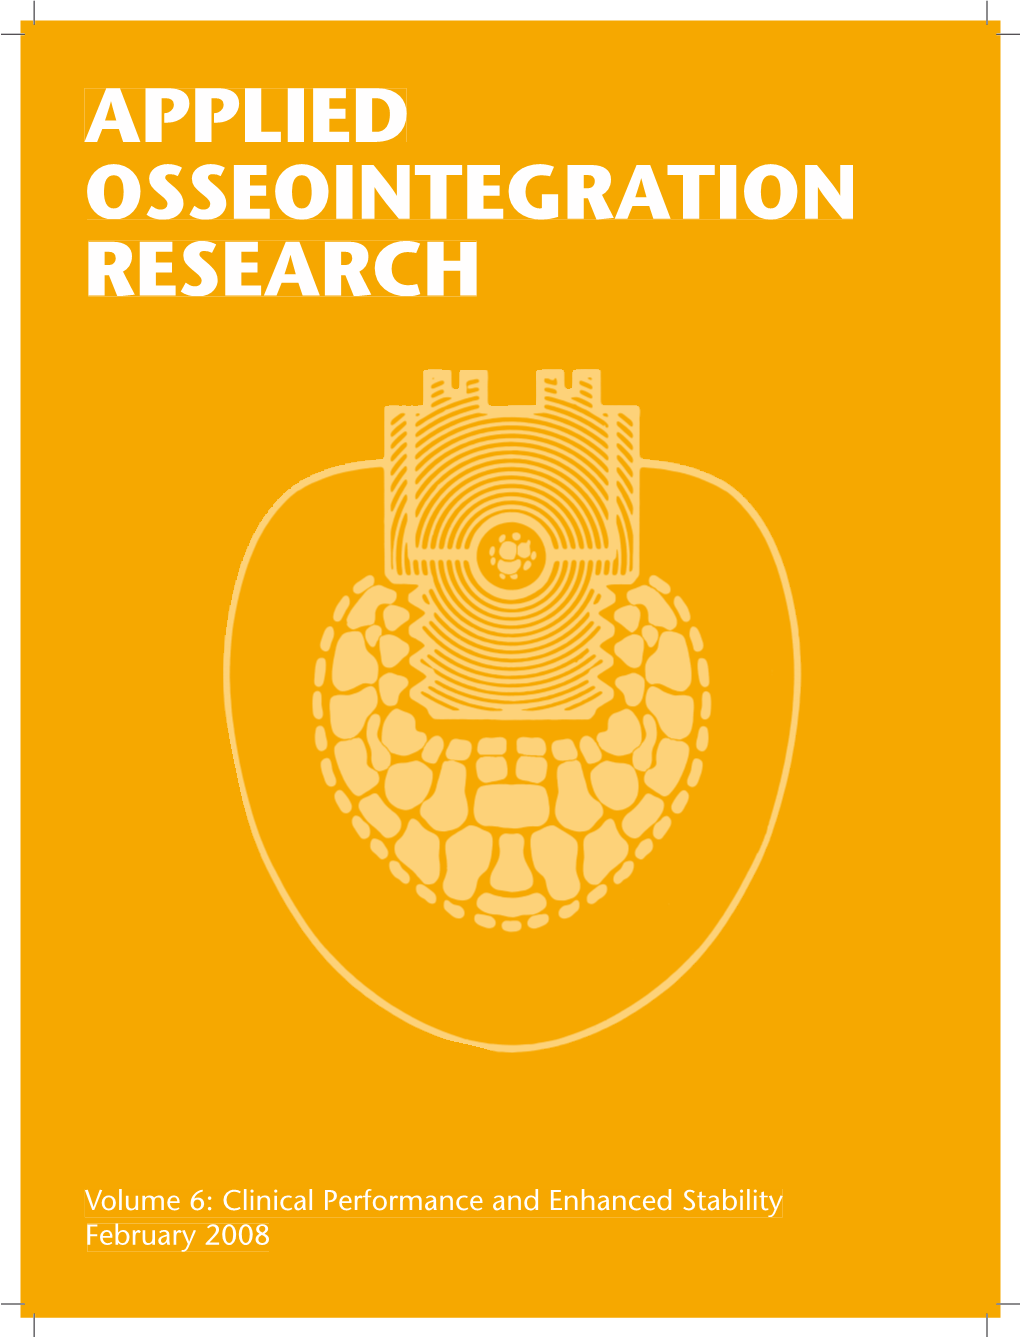 Applied Osseointegration Research C/O Professor Tomas Albrektsson Department of Biomaterials P.O